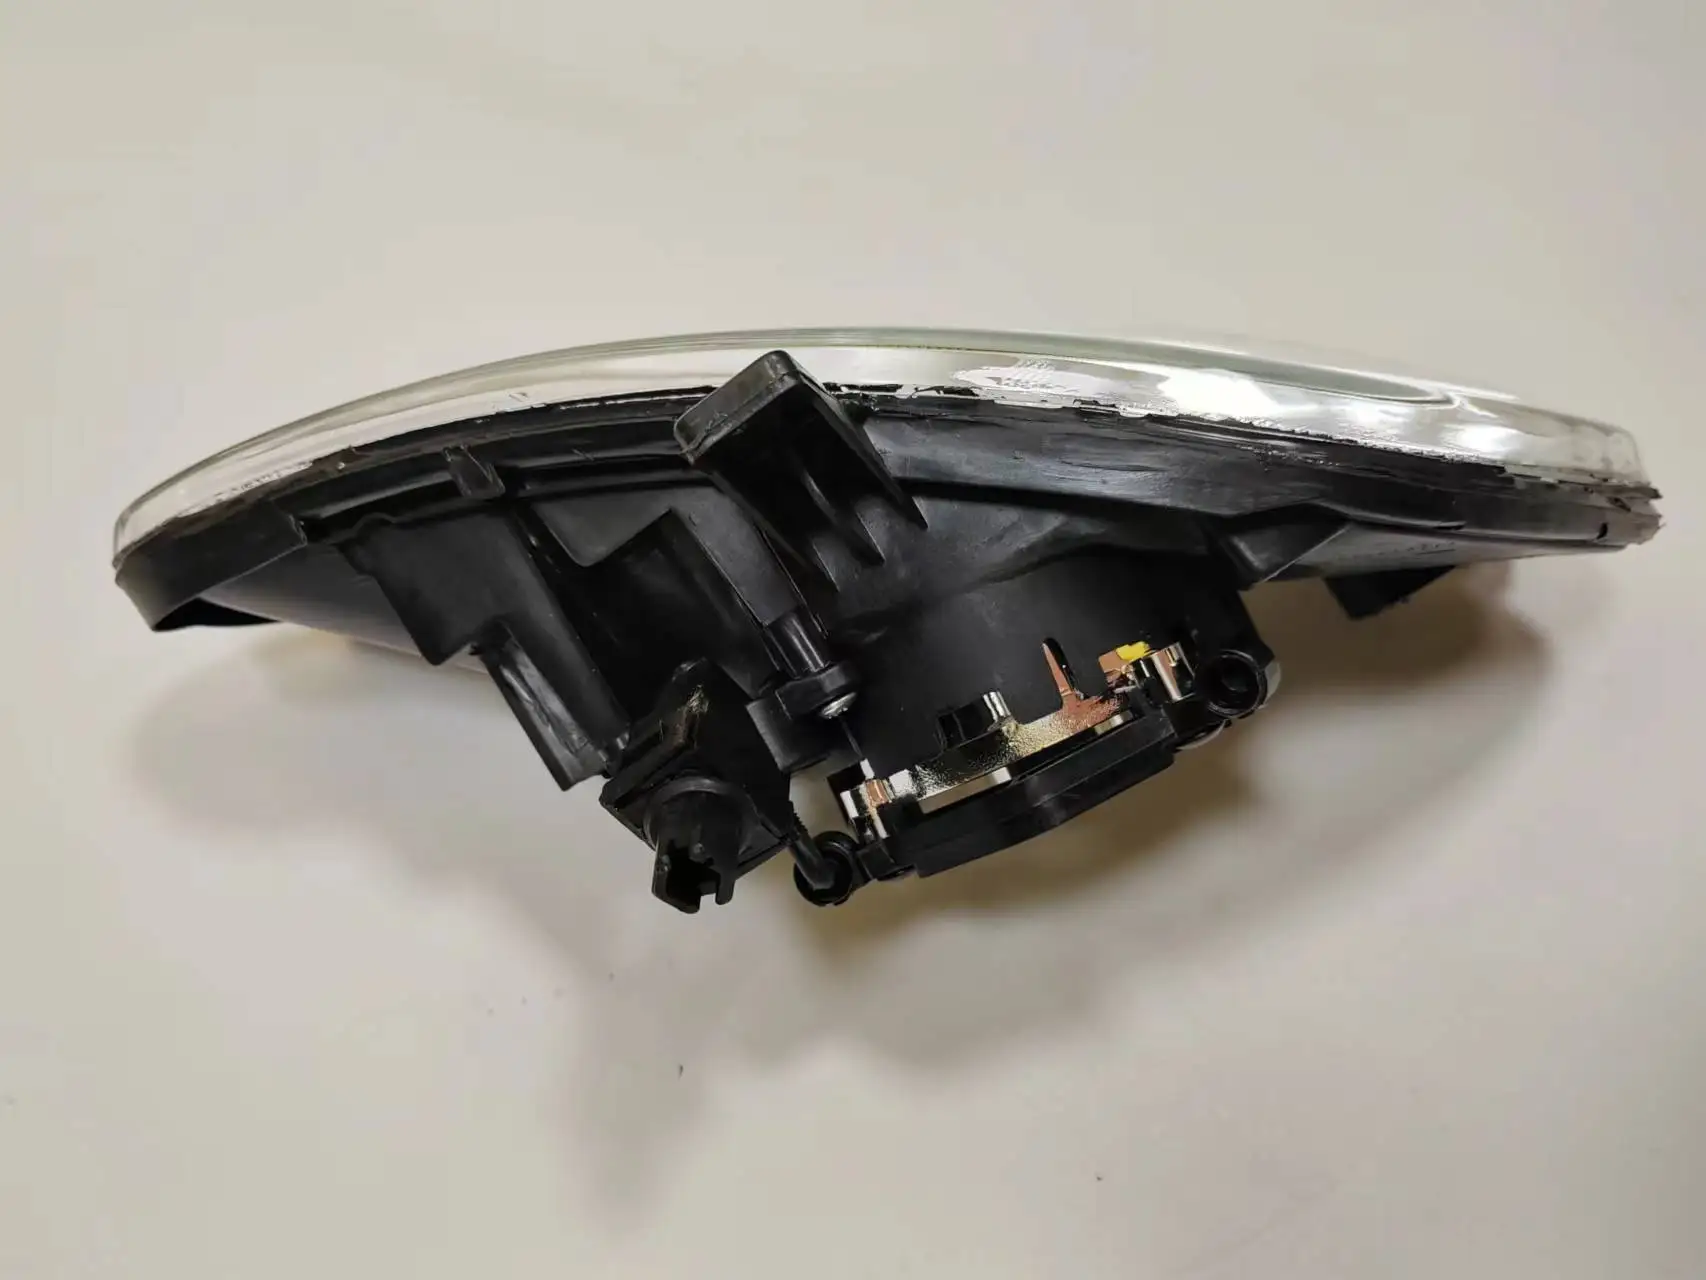 OE; A2218200156 A2218200256 For Benz Front Bumper Left Right Fog Lights Daytime Running Lamp old W221 S280 S350 S400 S500